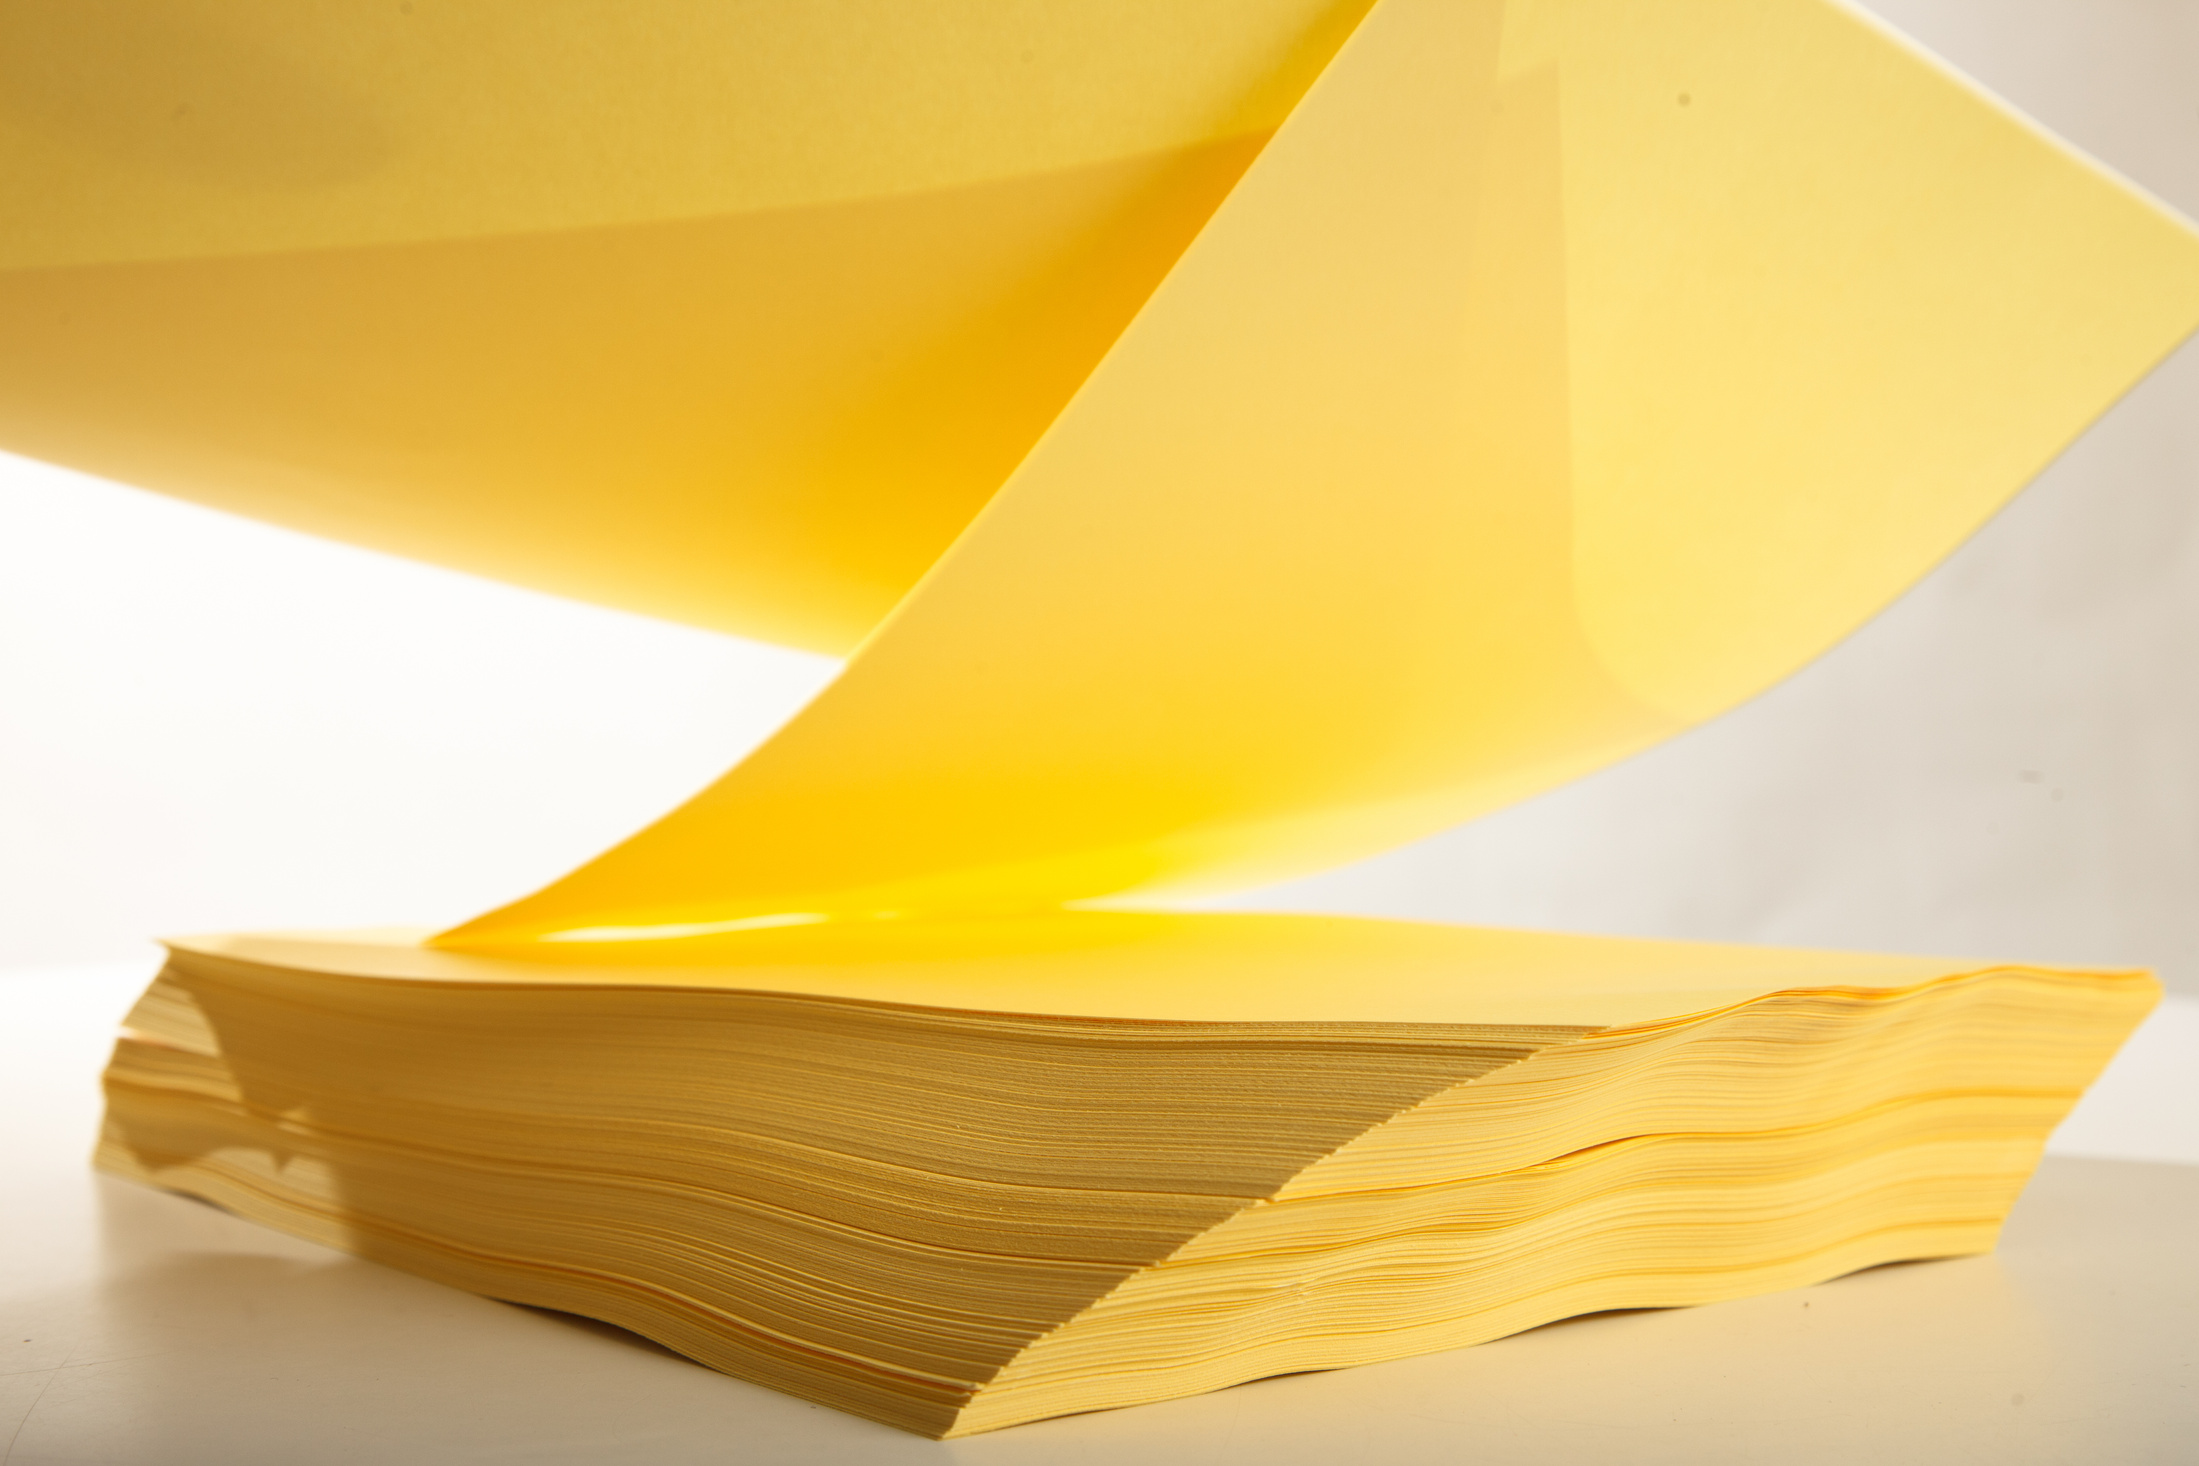 Sheets of yellow printer paper falling on white background.